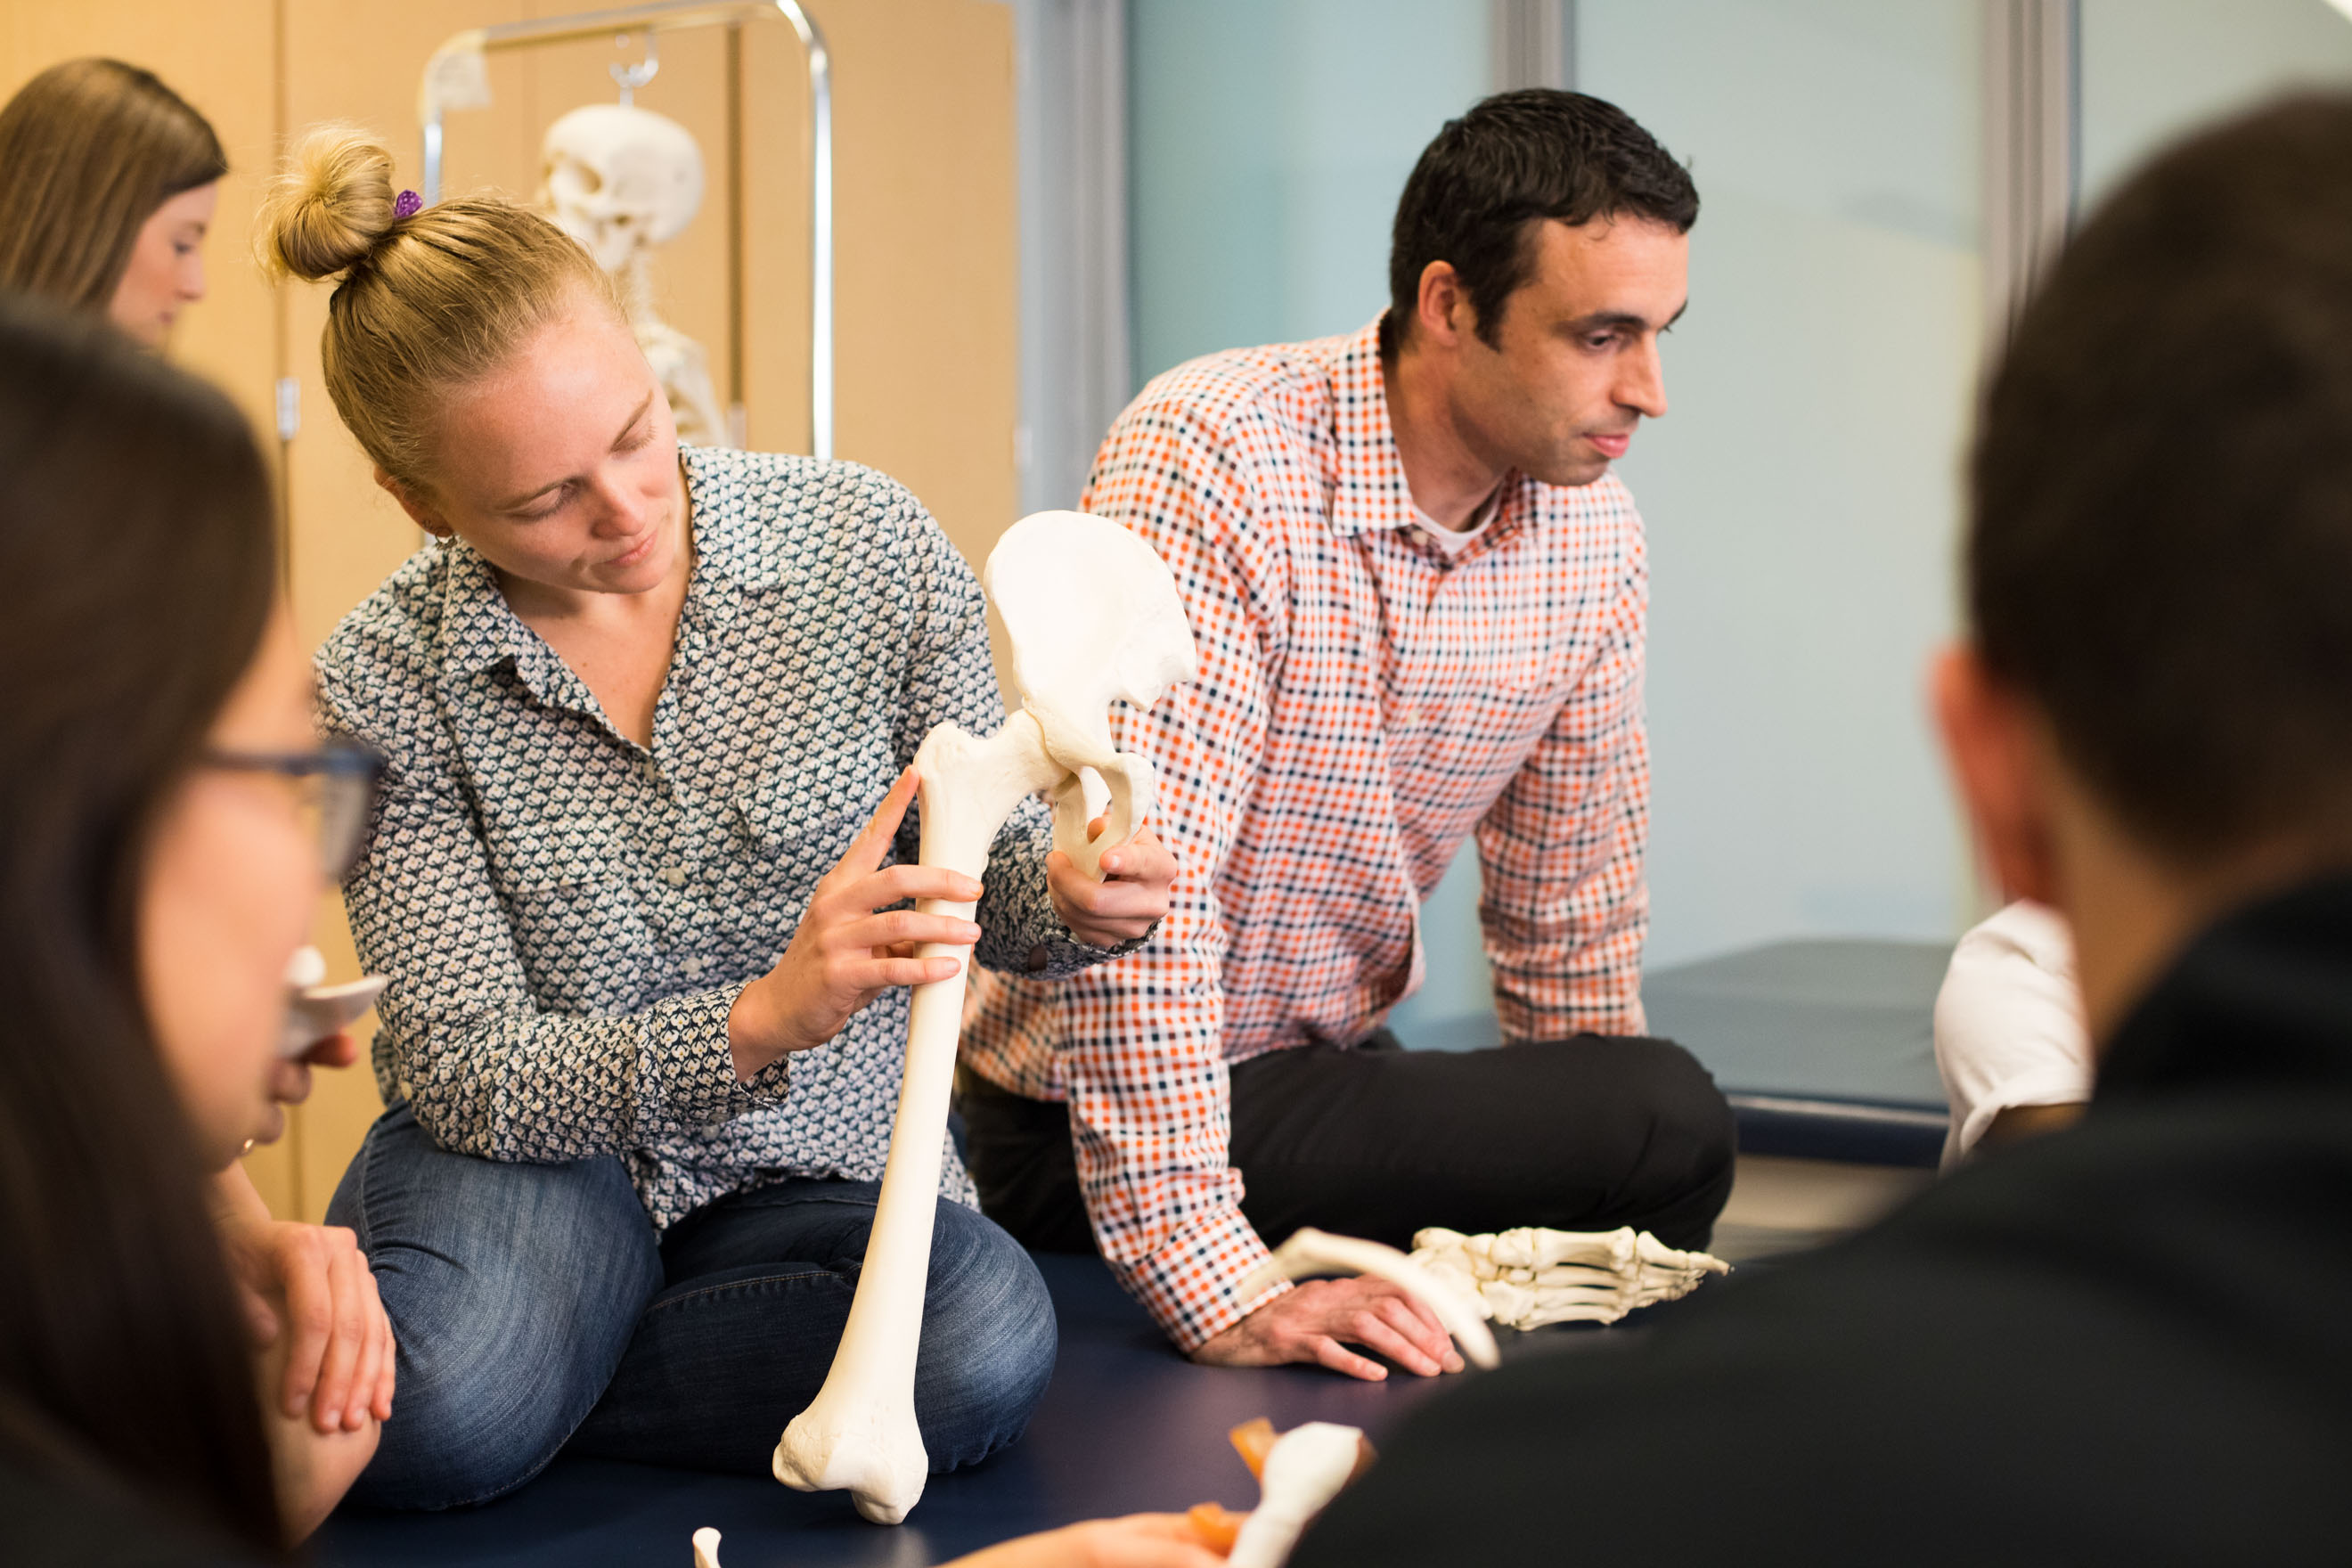 A physical therapy students examines the structure of the femur.